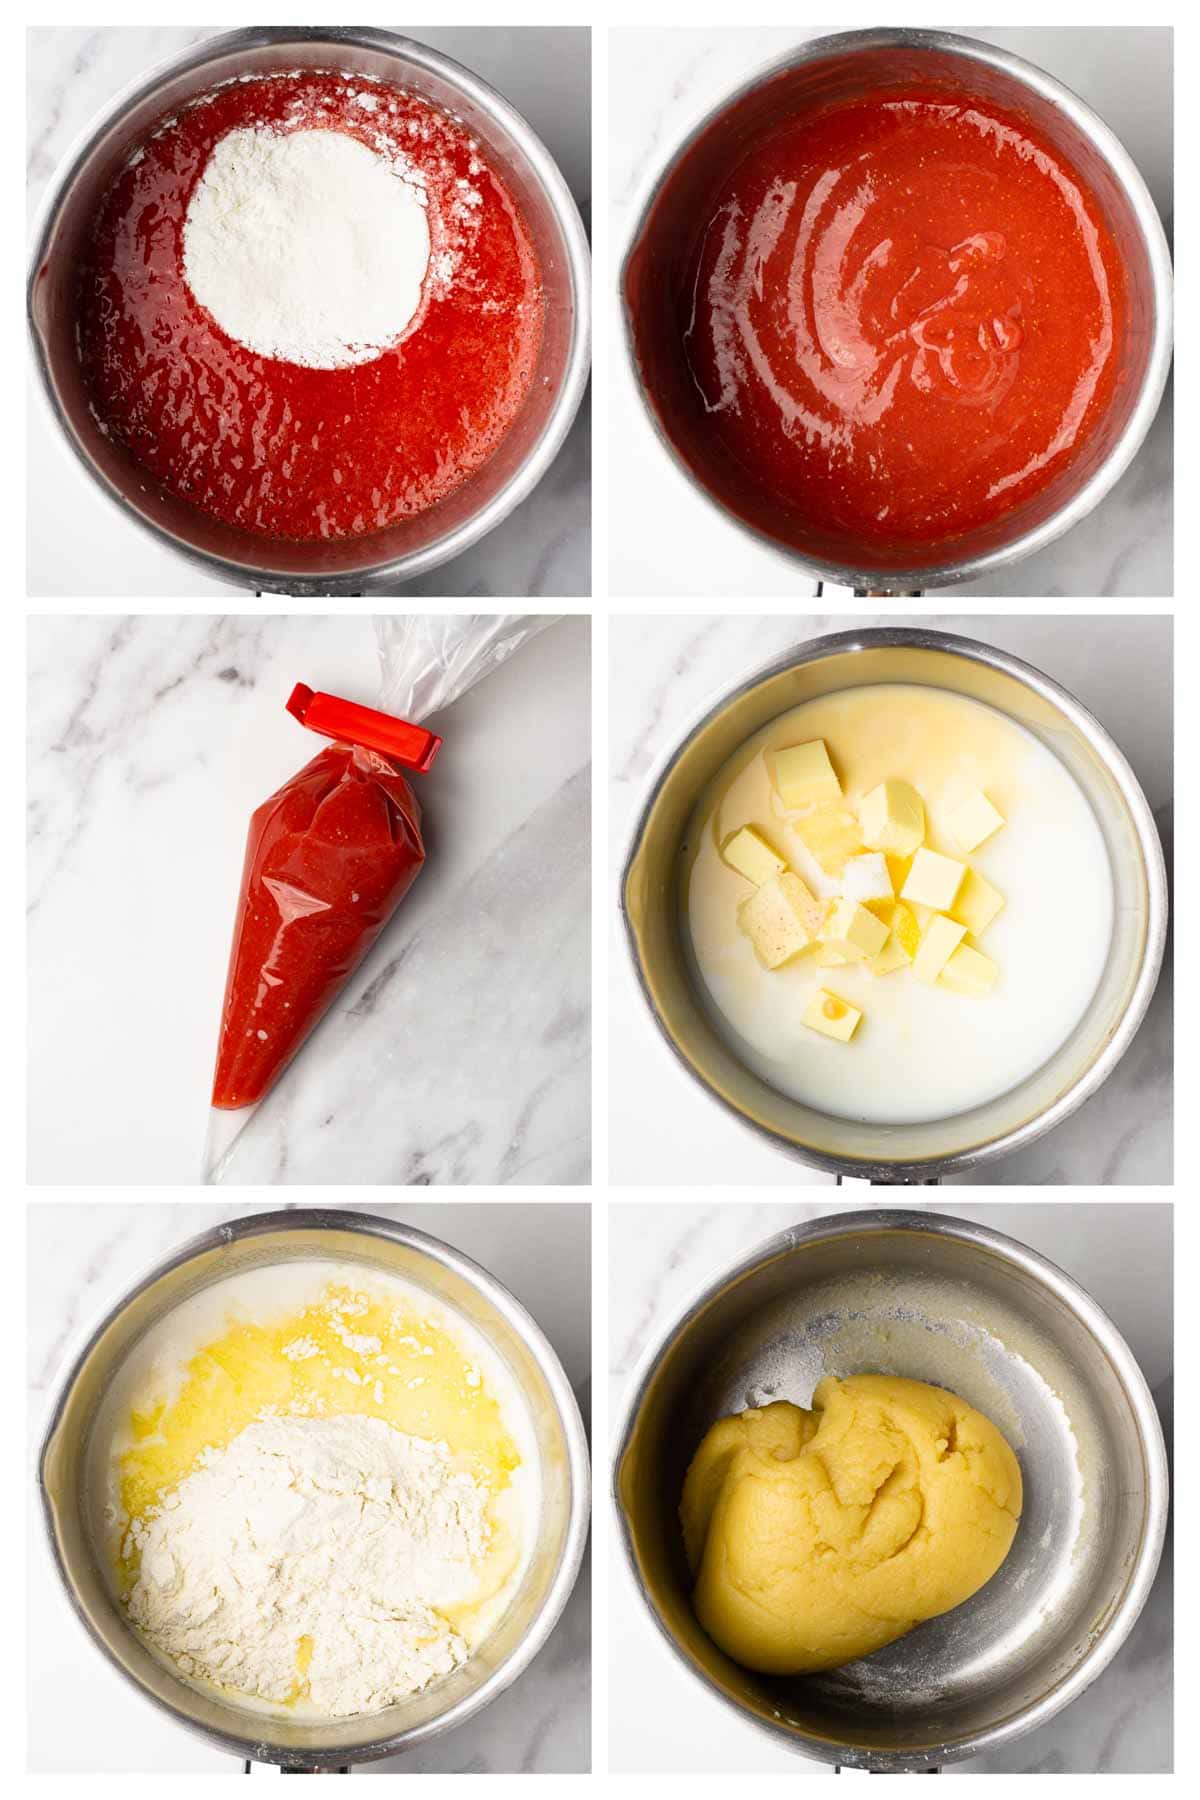 Collage image showing step by step directions to make strawberry filling and choux pastry for cream puffs.